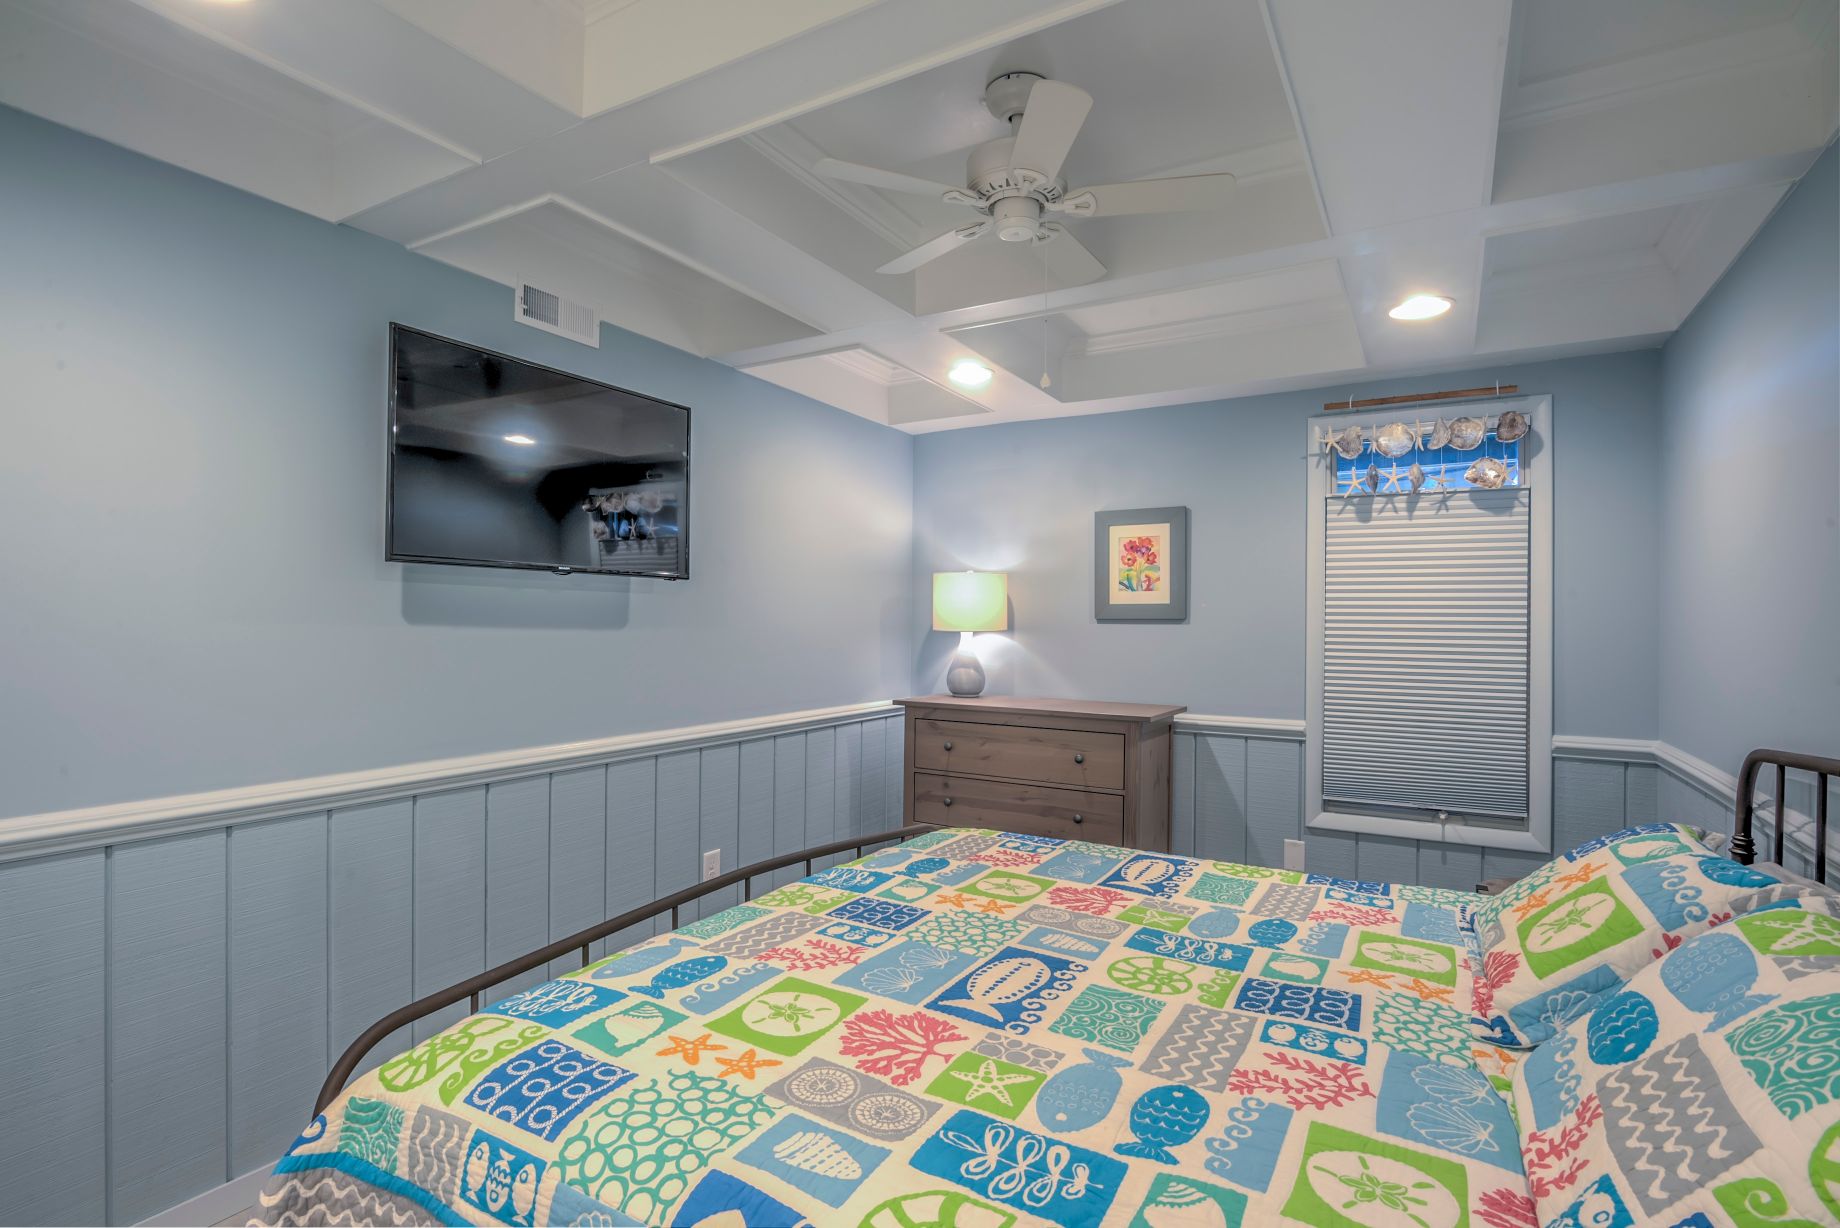 Renovation in Campbell Place, Bethany Beach DE - Bedroom with White Ceiling Fan and Sea Themed Details Above Window Blinds